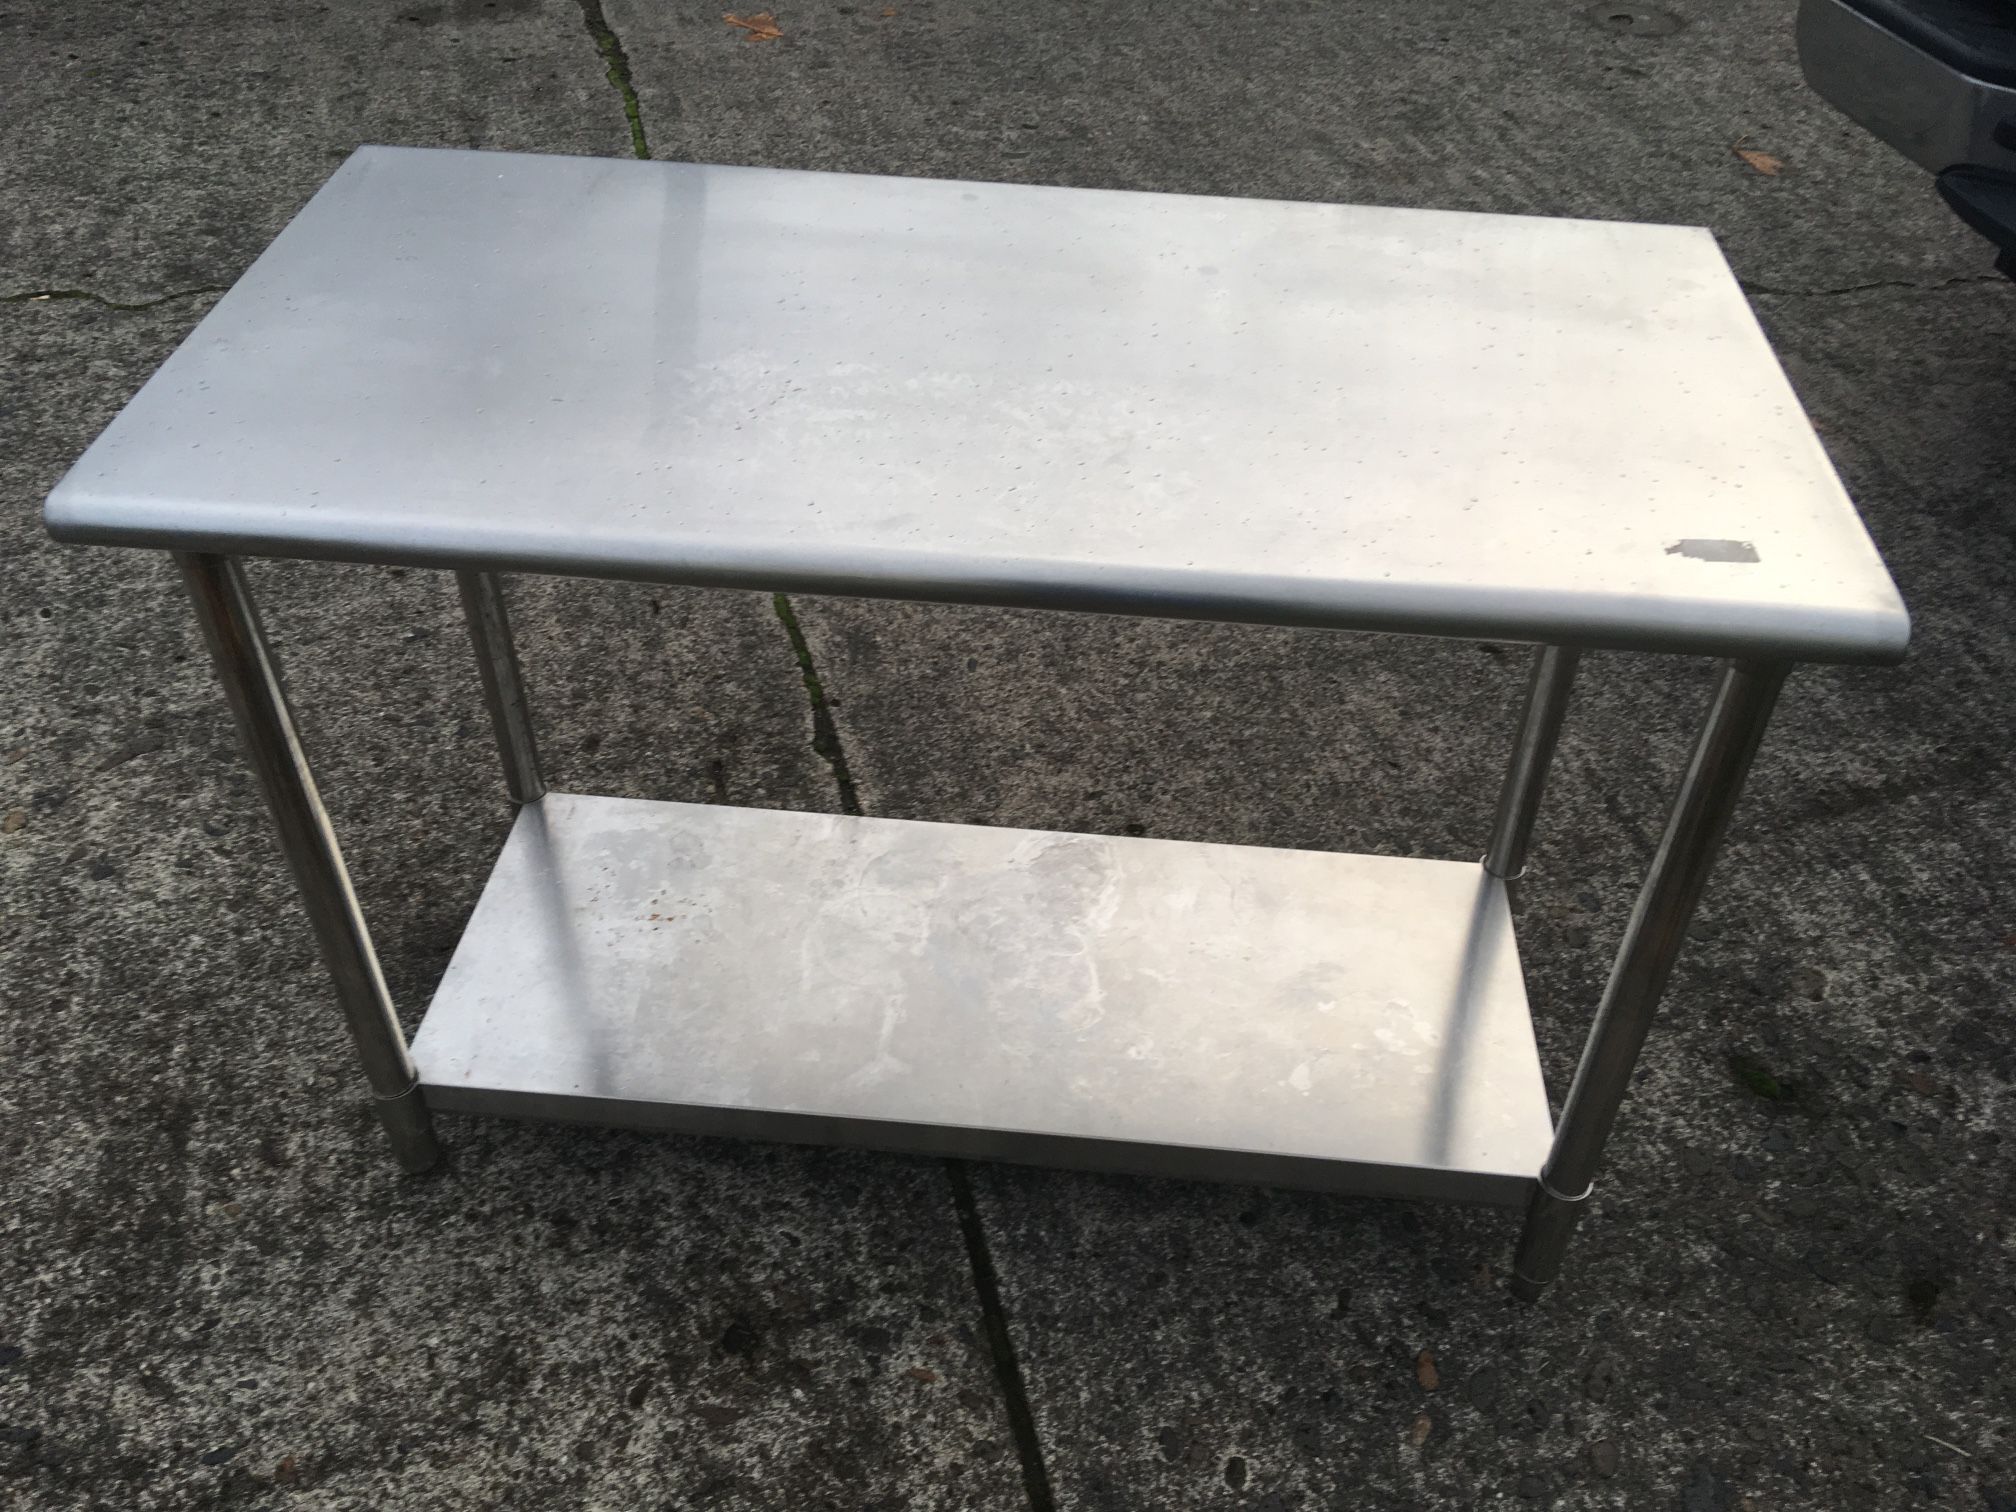 New Metal Table-2 Month Old